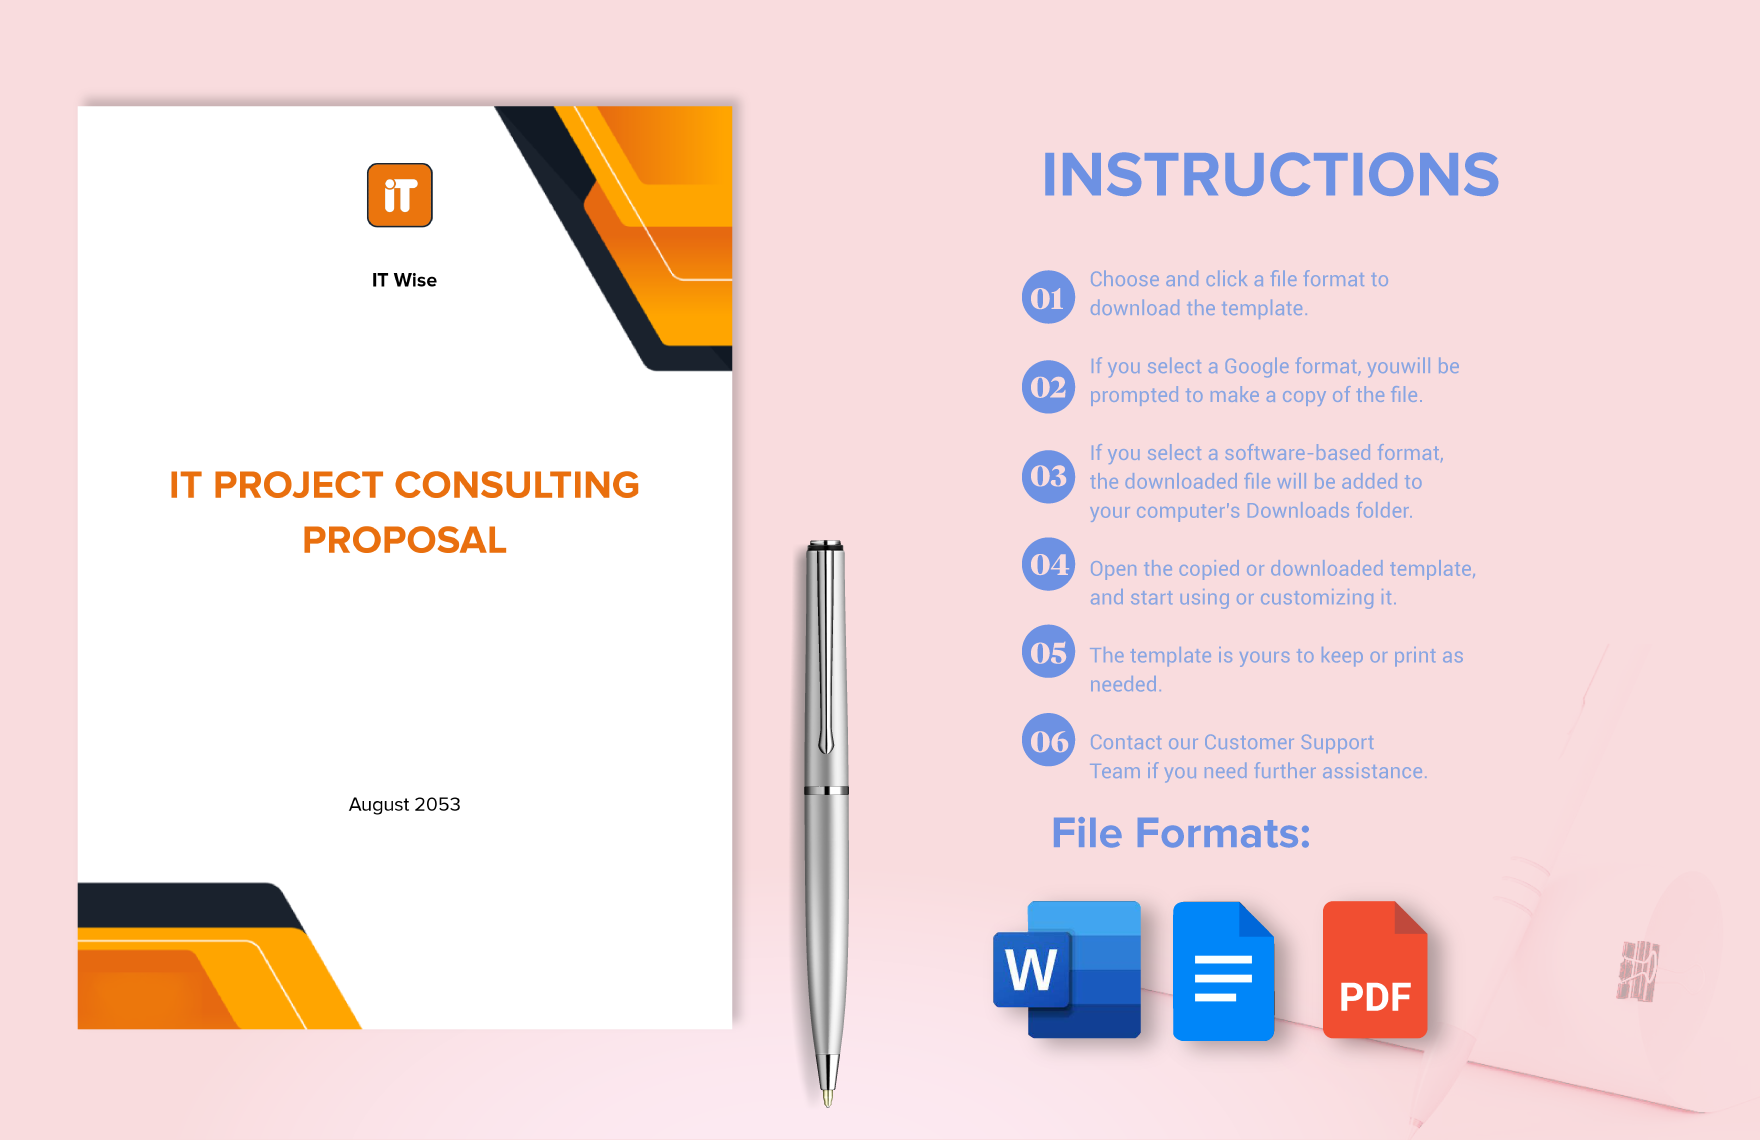 IT Project Consulting Proposal Template